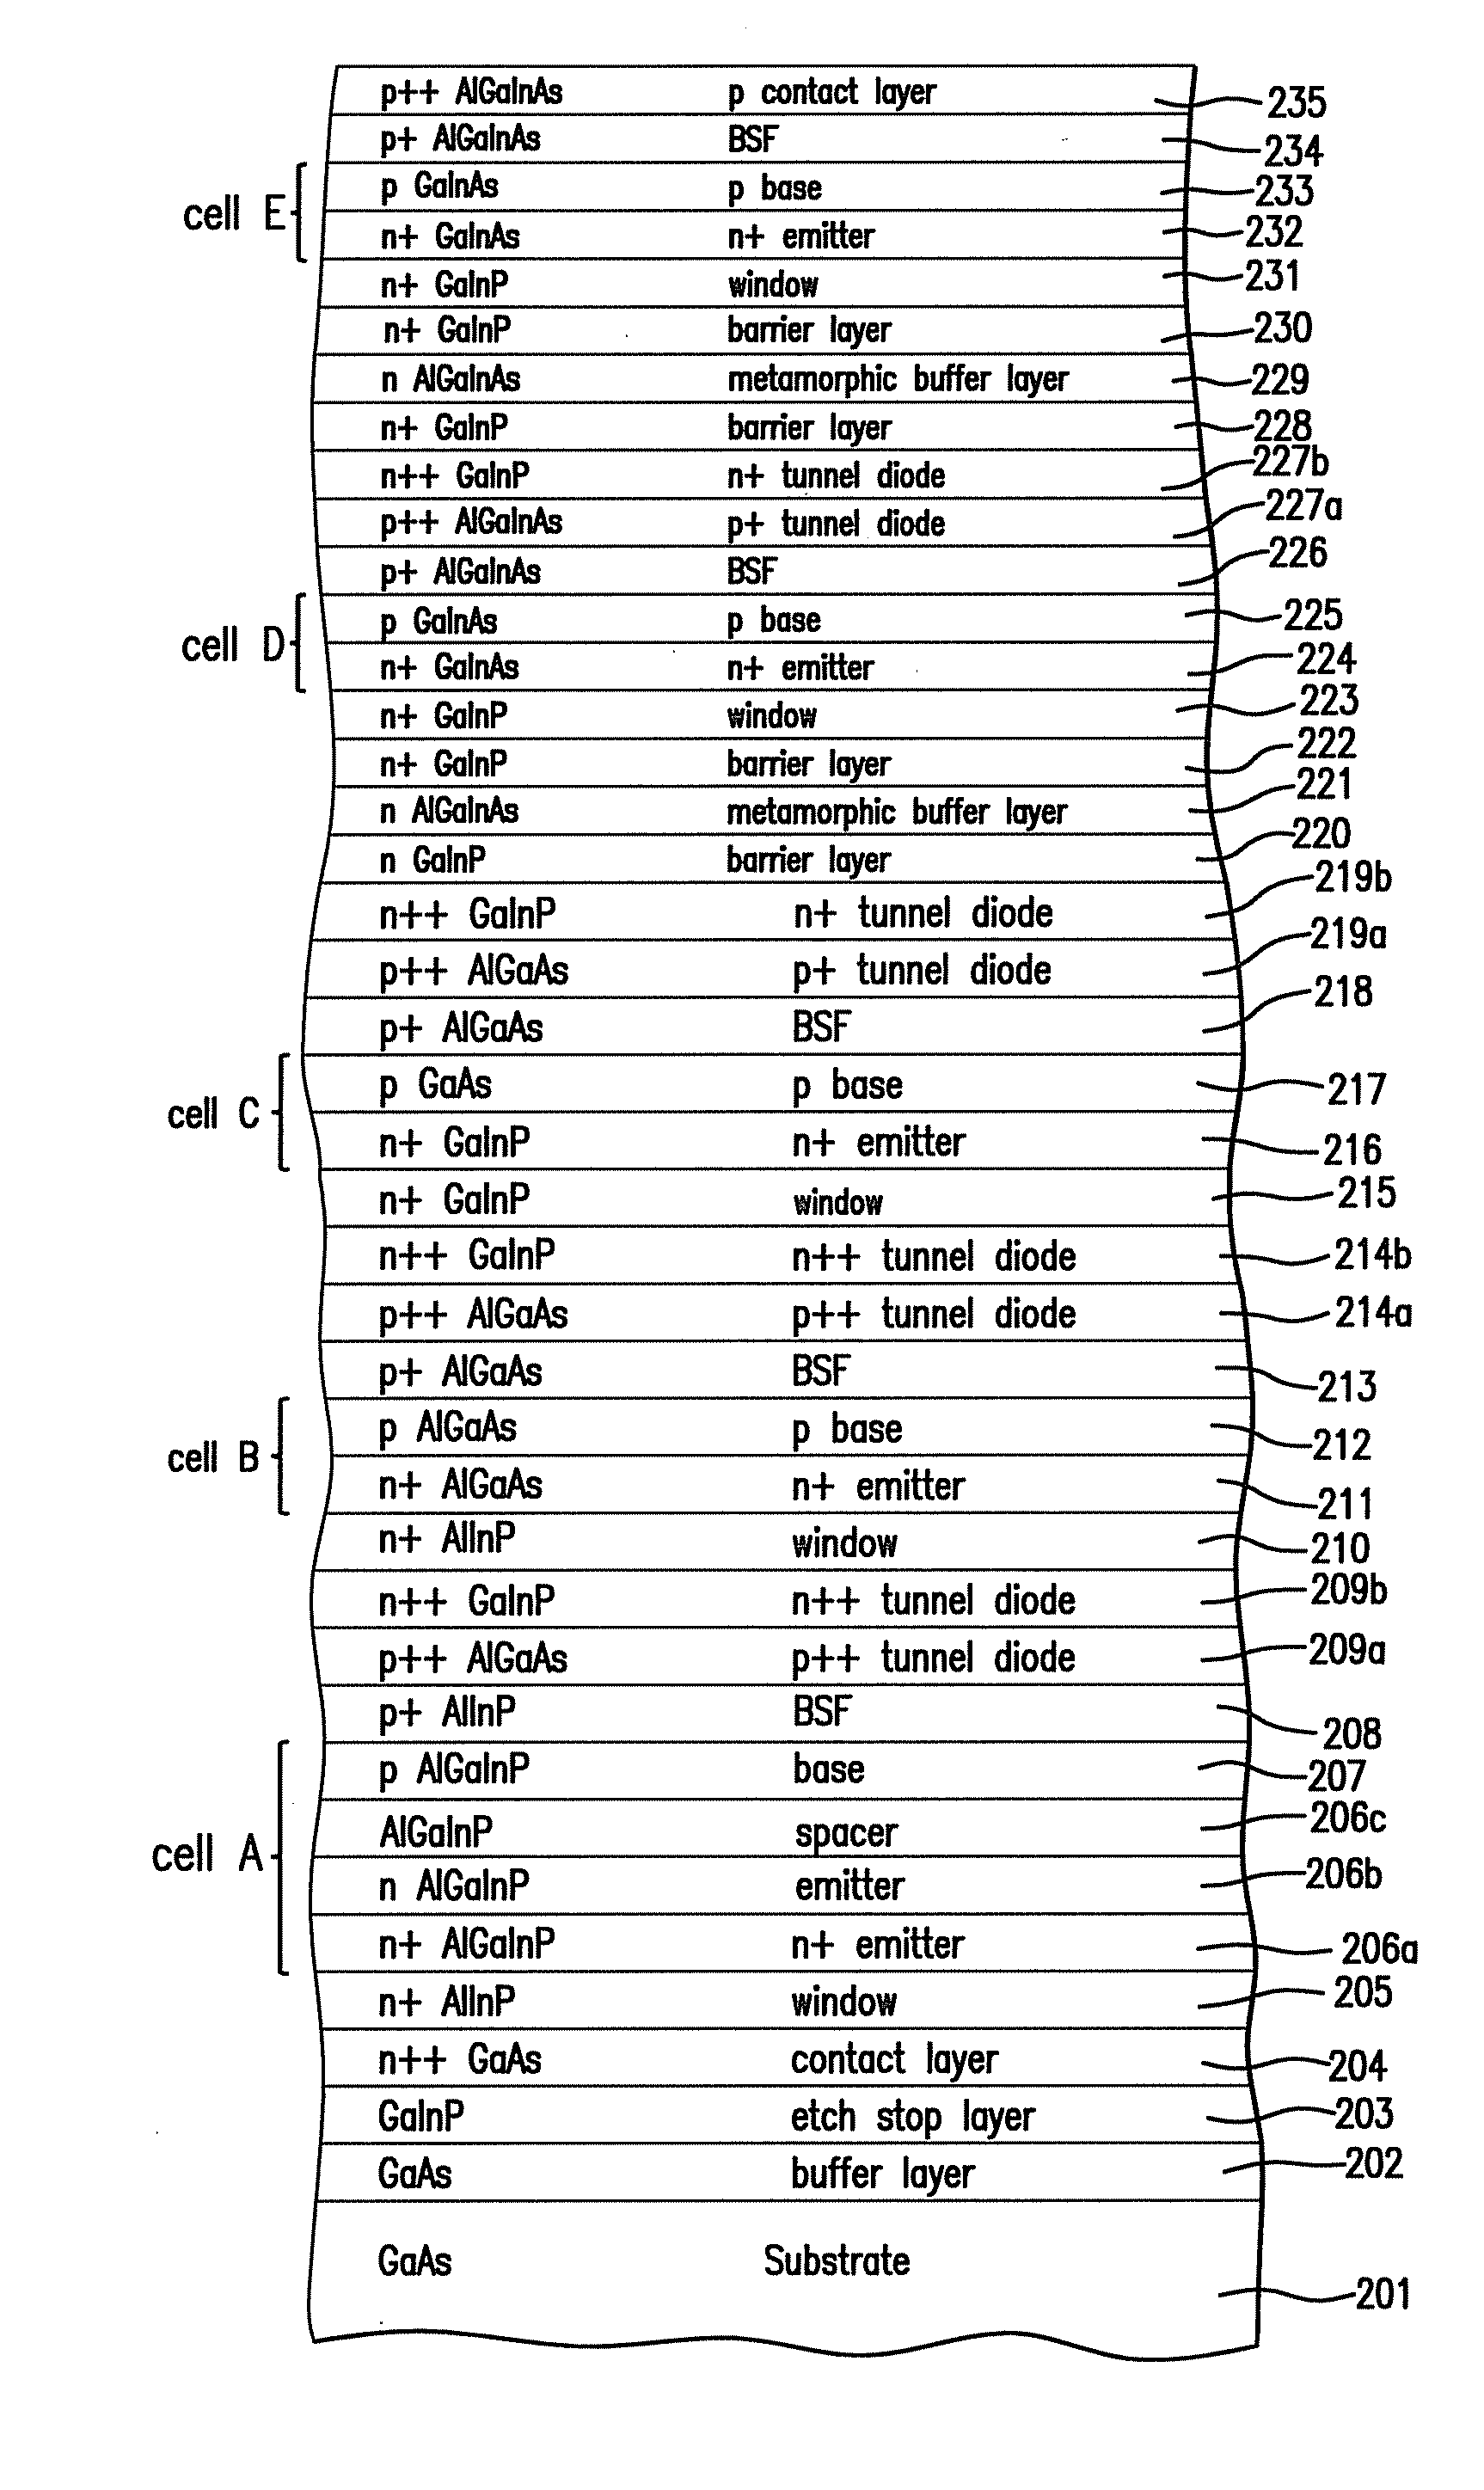 Inverted metamorphic multijunction solar cell with two metamorphic layers and homojunction top cell